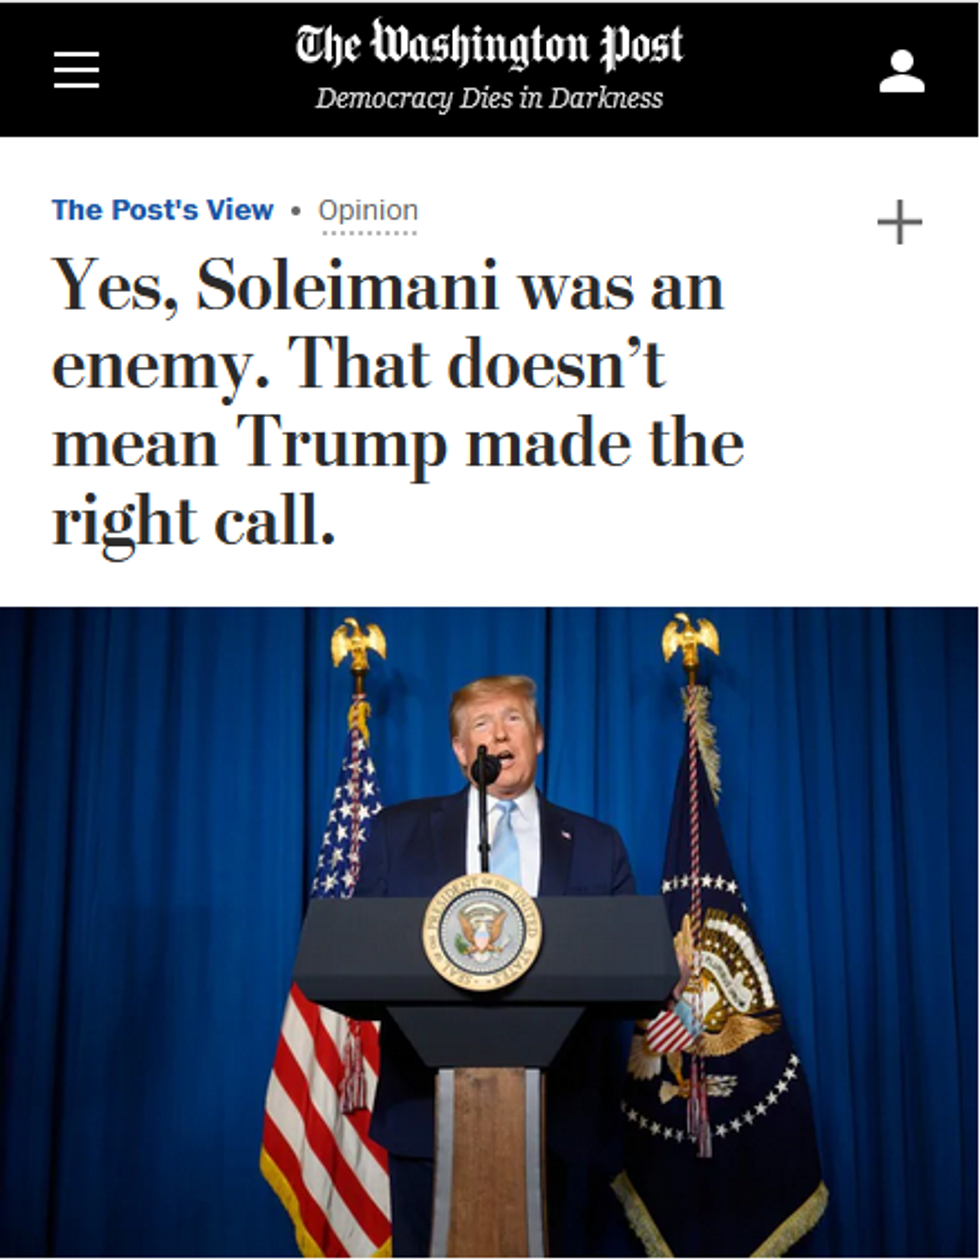 WaPo: Yes, Soleimani was an enemy. That doesn't mean Trump made the right call.